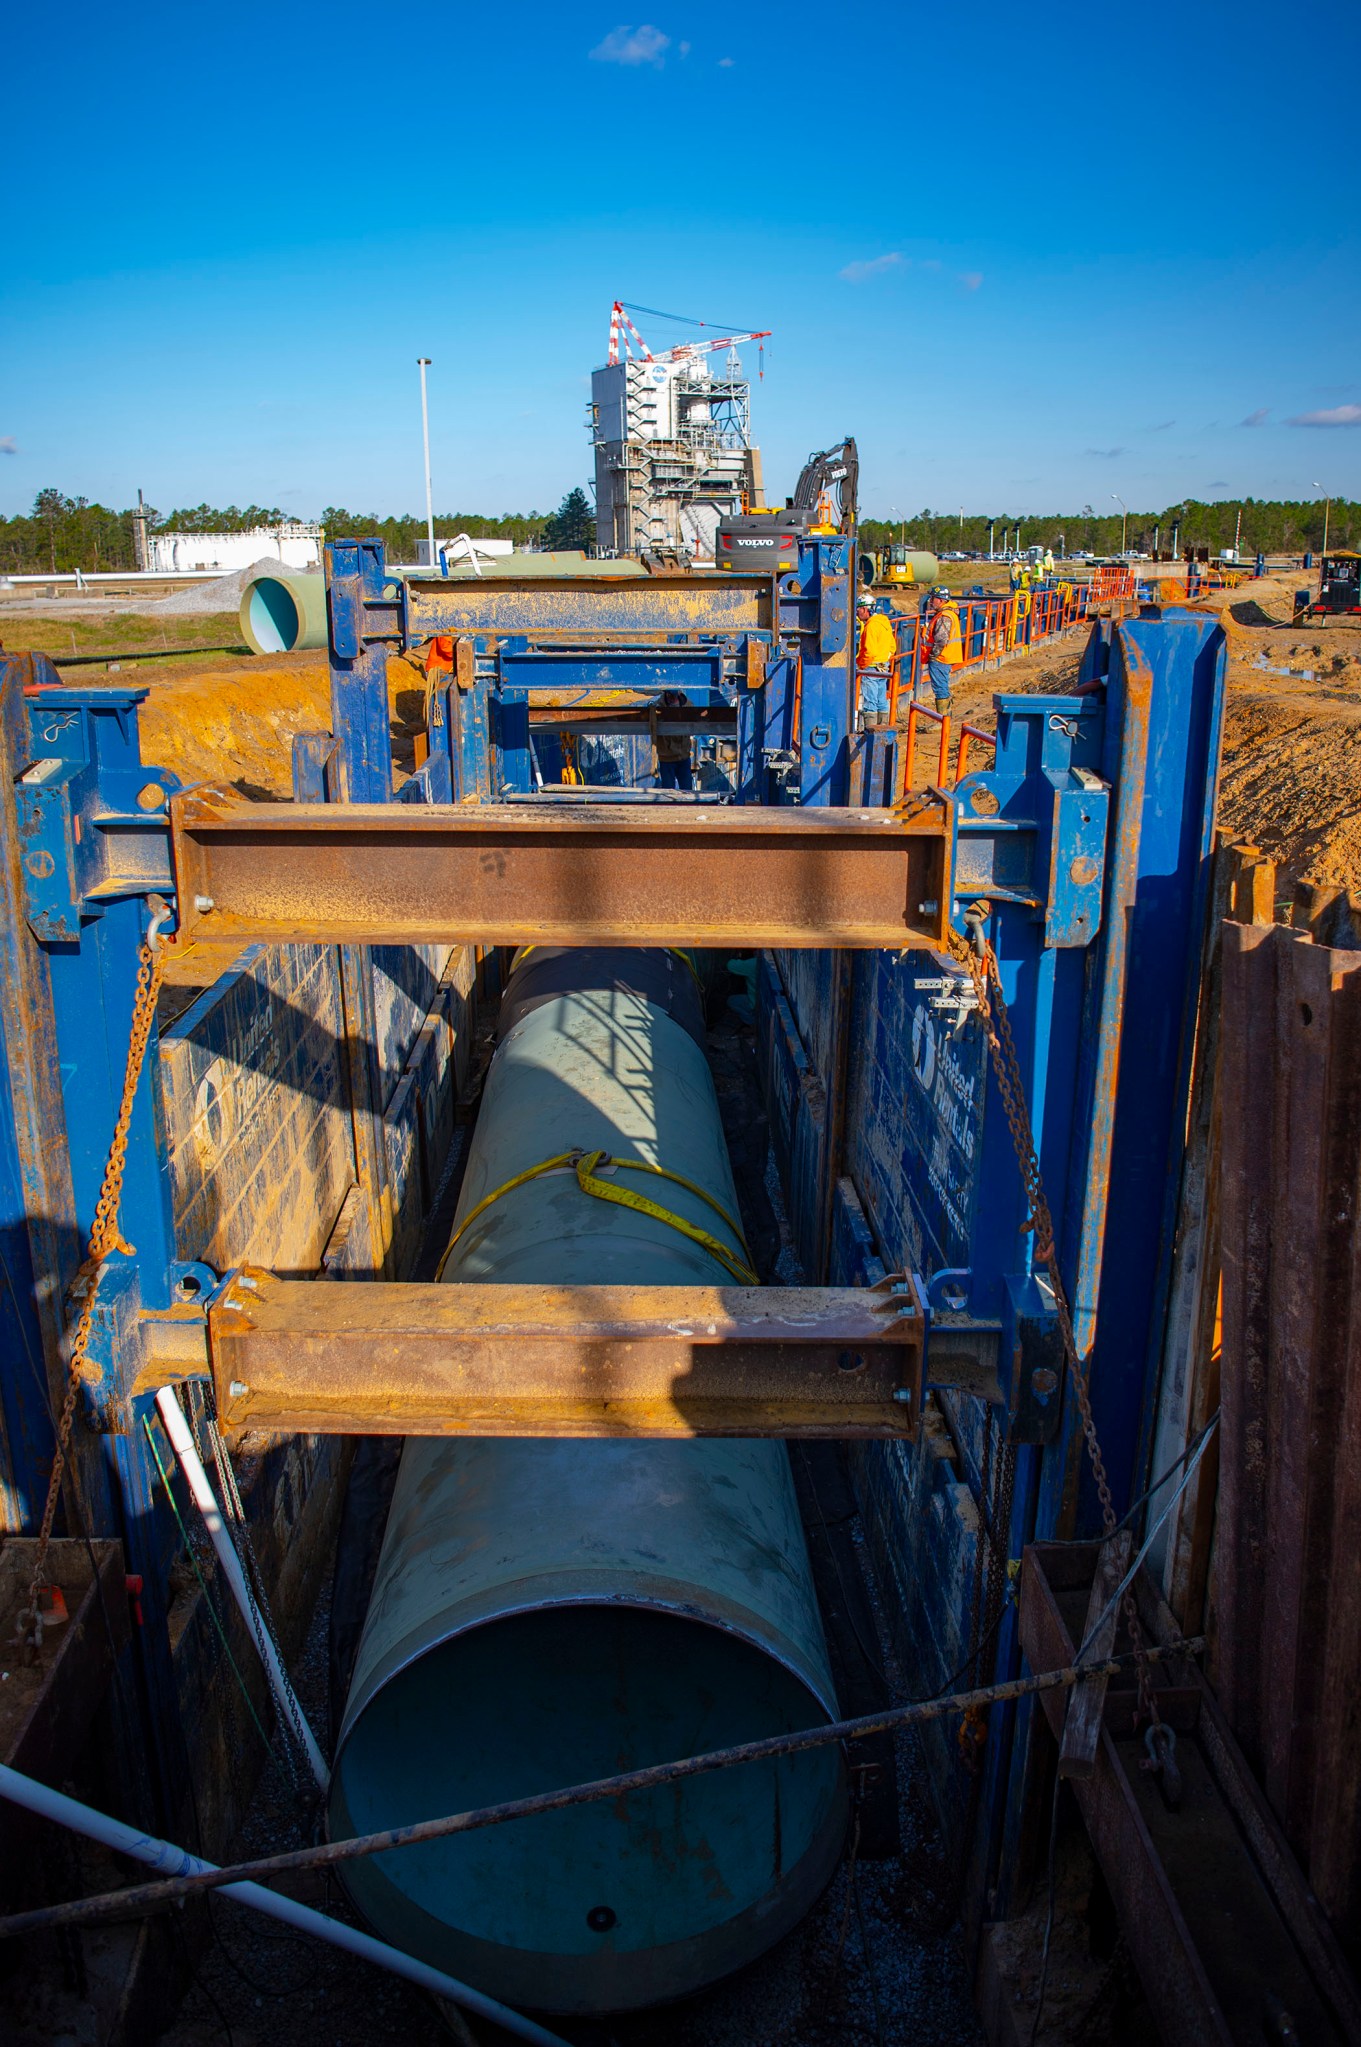 Crews use a shoring system to hold back soil March 23, 2022, as they install new 75-inch piping leading from Stennis Space Center’s High Pressure Industrial Water Facility to the valve vault pit serving the Fred Haise Test Stand.